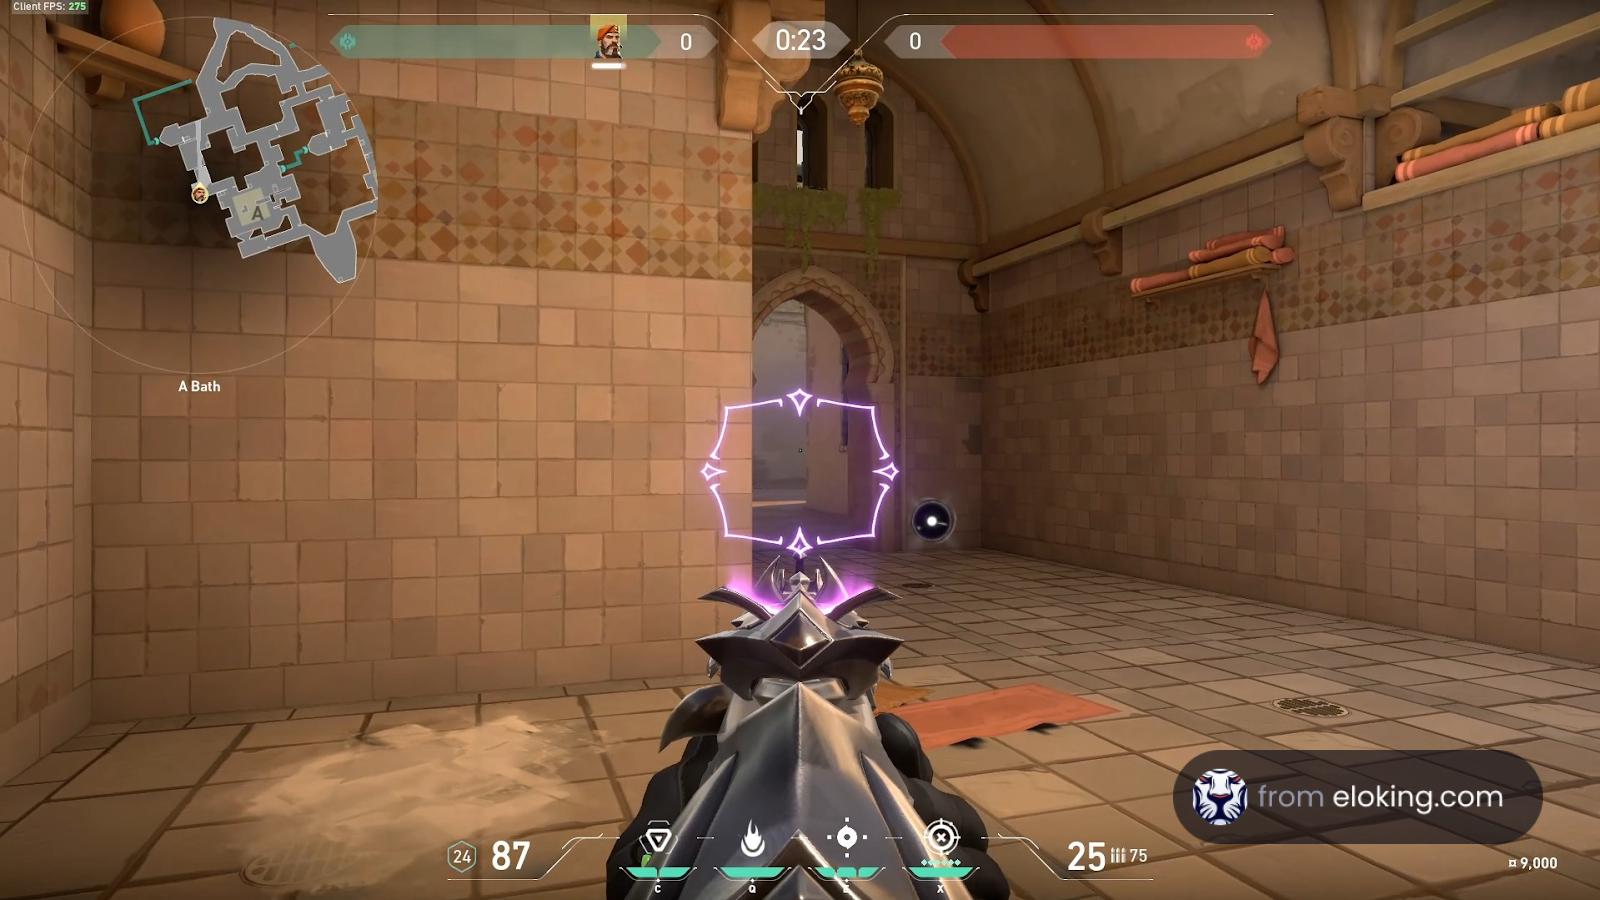 First-person view of a player navigating a stone archway in a tactical shooter game